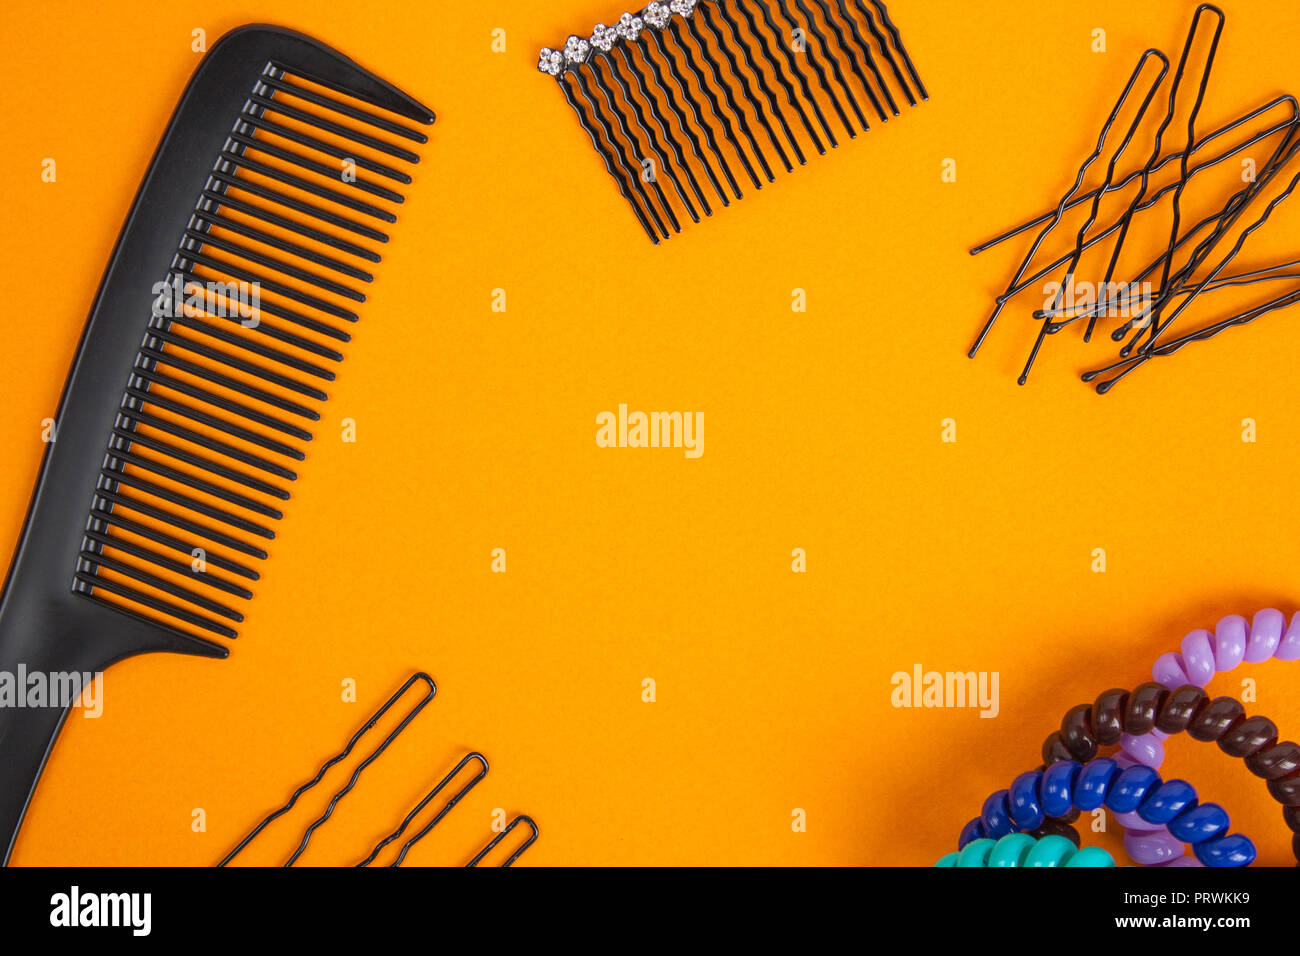 Hairbrush, barrette, hairpins and hair bands lies on orange background. Flat lay. Stock Photo